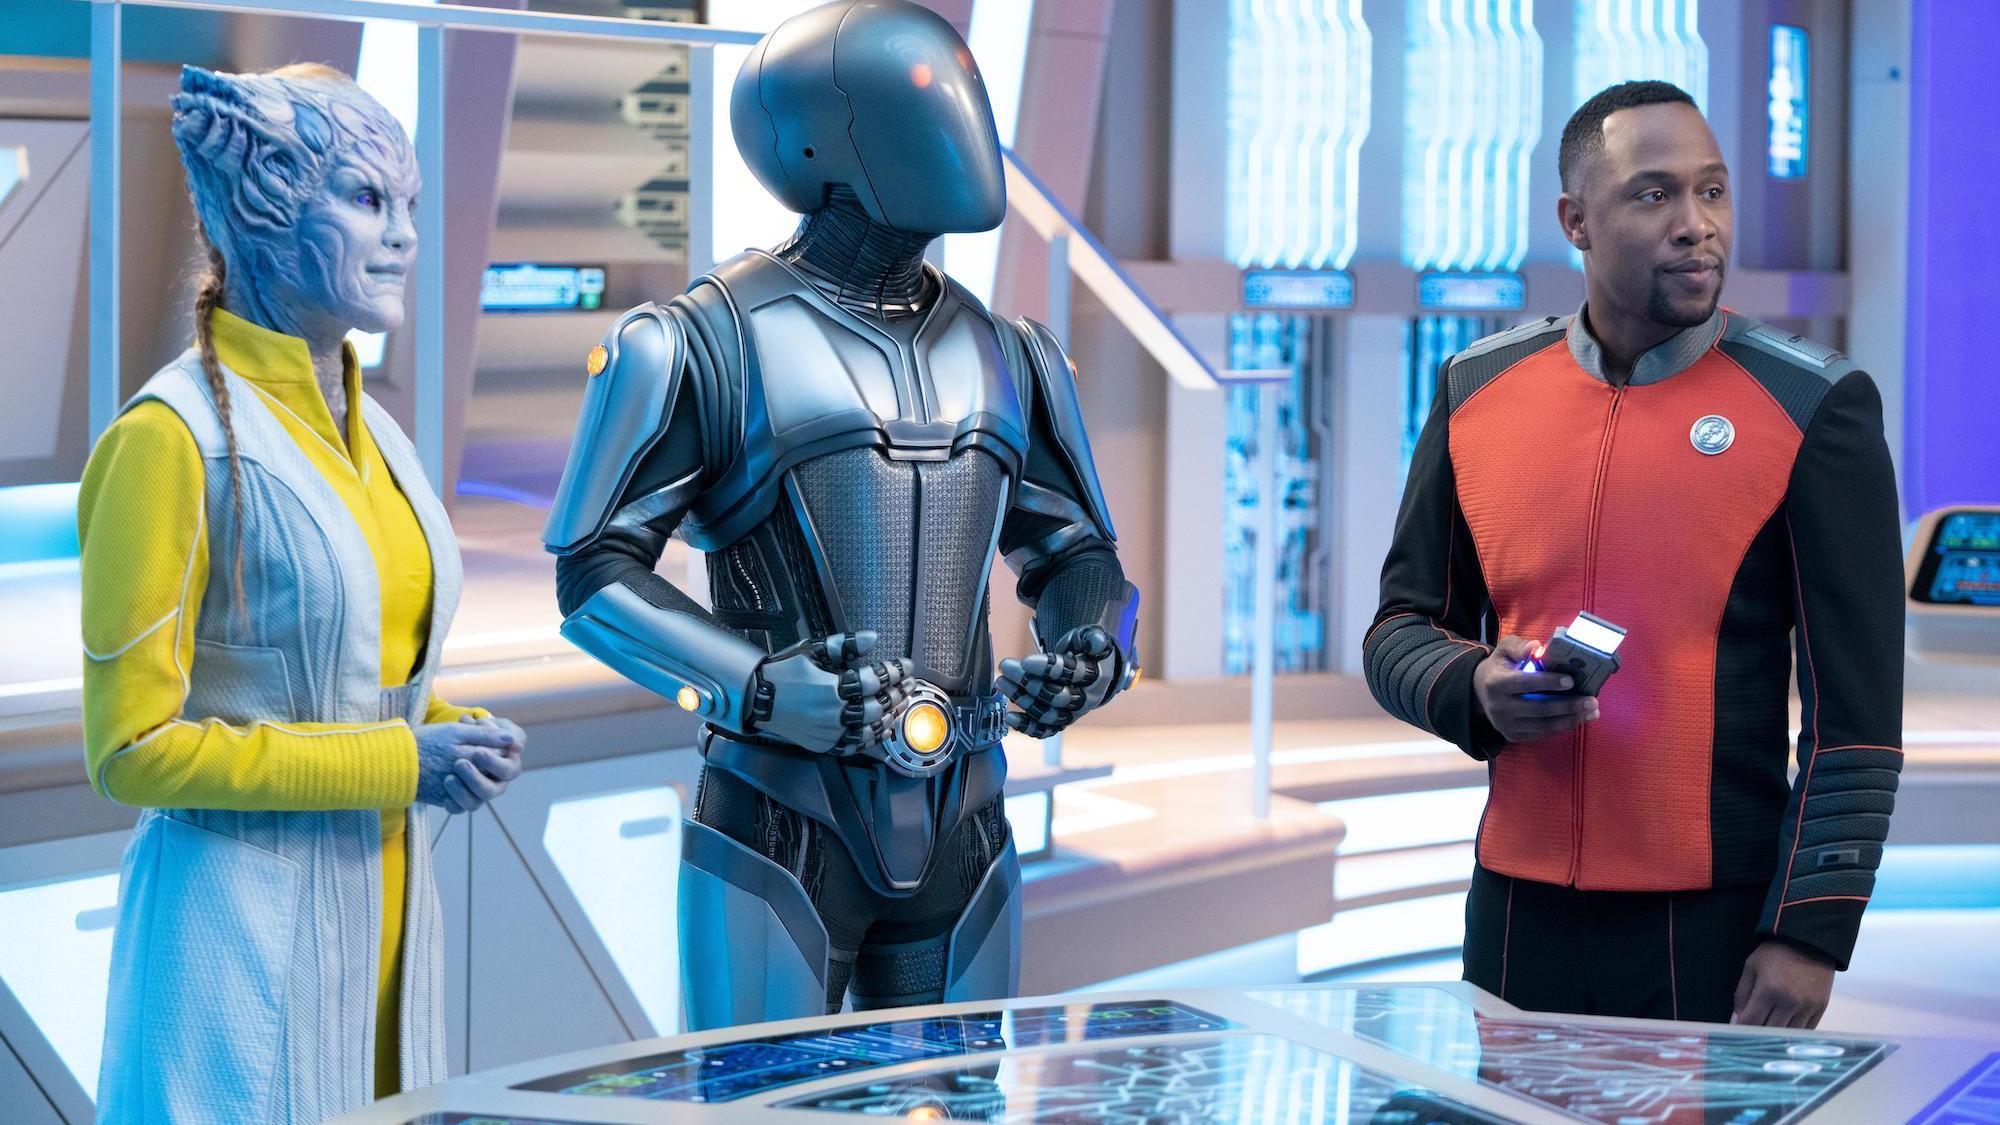 The Orville: New Horizons -- “From Unknown Graves” - Episode 307 -- The Orville discovers a Kaylon with a very special ability. Dr. Villka (Eliza Taylor), Isaac (Mark Jackson) and Lt. Cmdr. John LaMarr (J Lee), shown. (Photo by: Greg Gayne/Hulu)